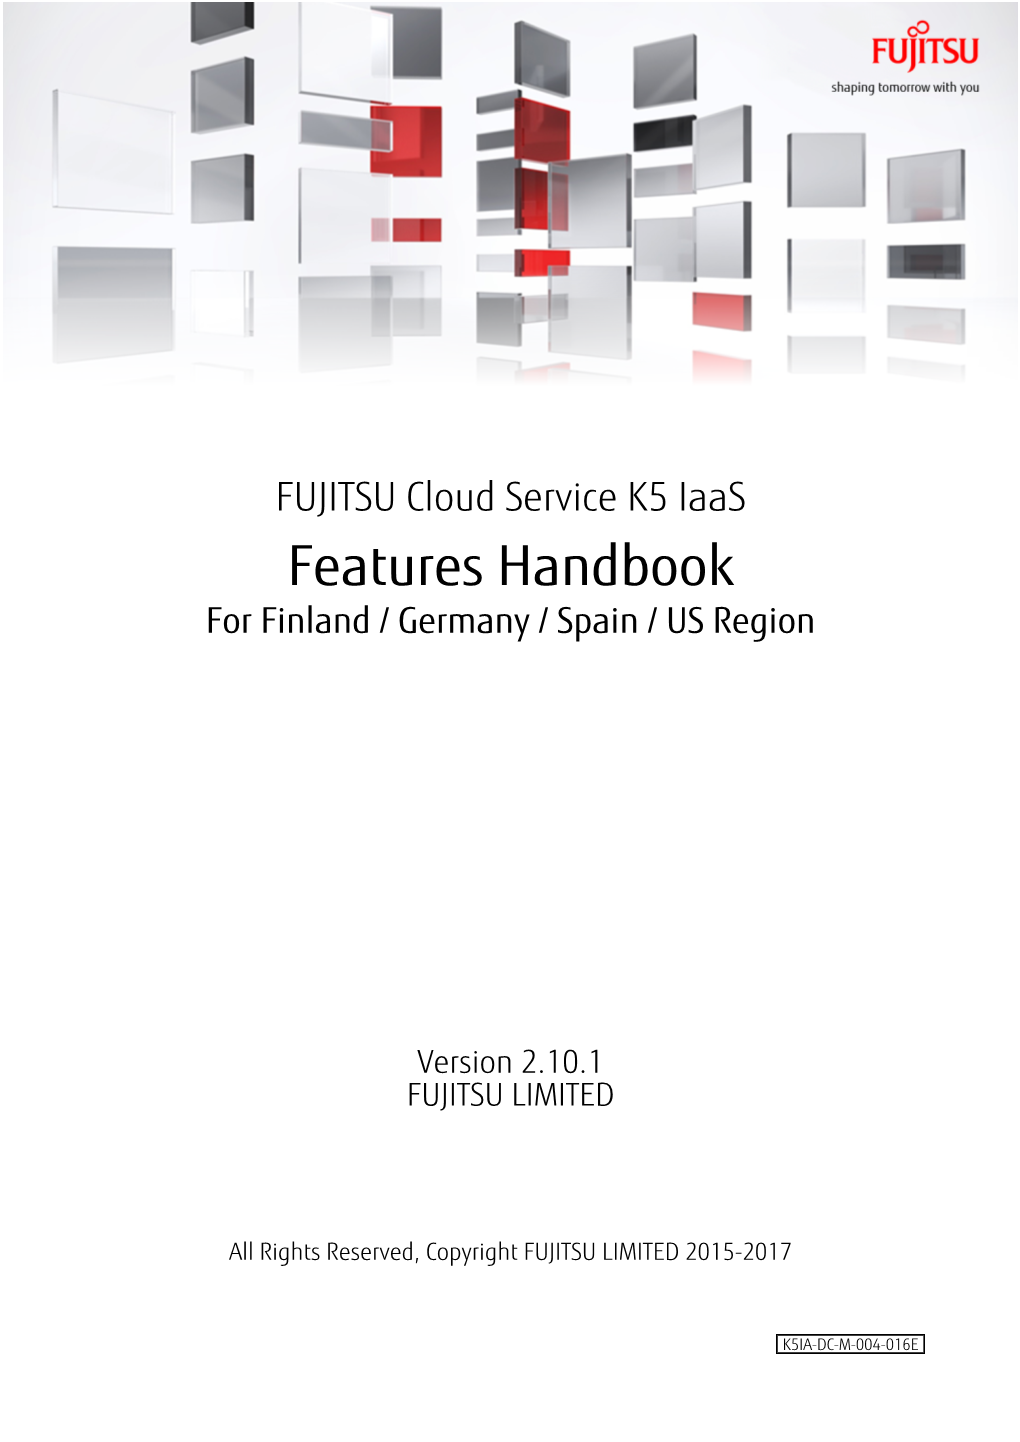 Features Handbook for Finland / Germany / Spain / US Region